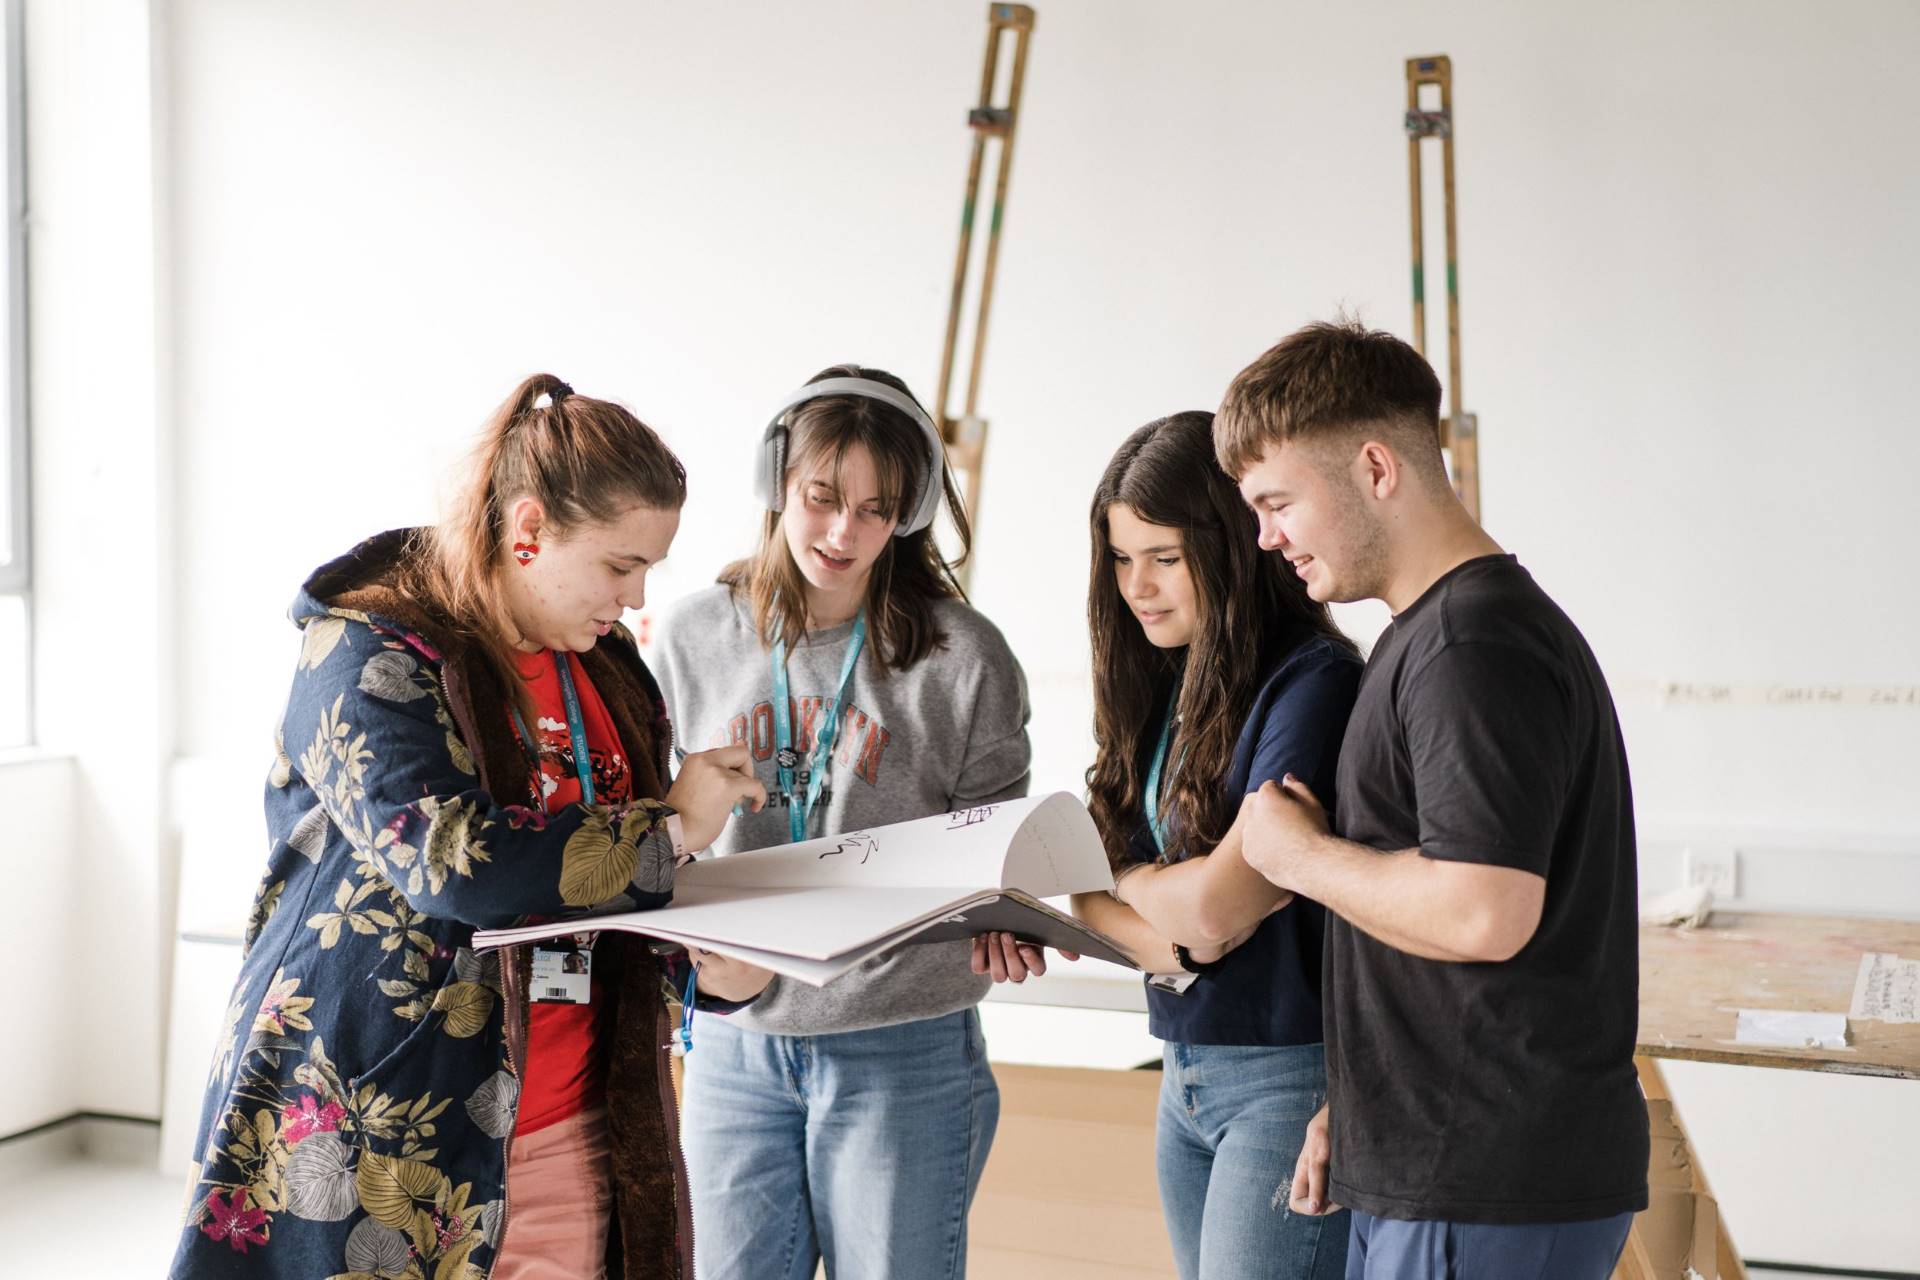 A group of art and design students looking through a sketch book